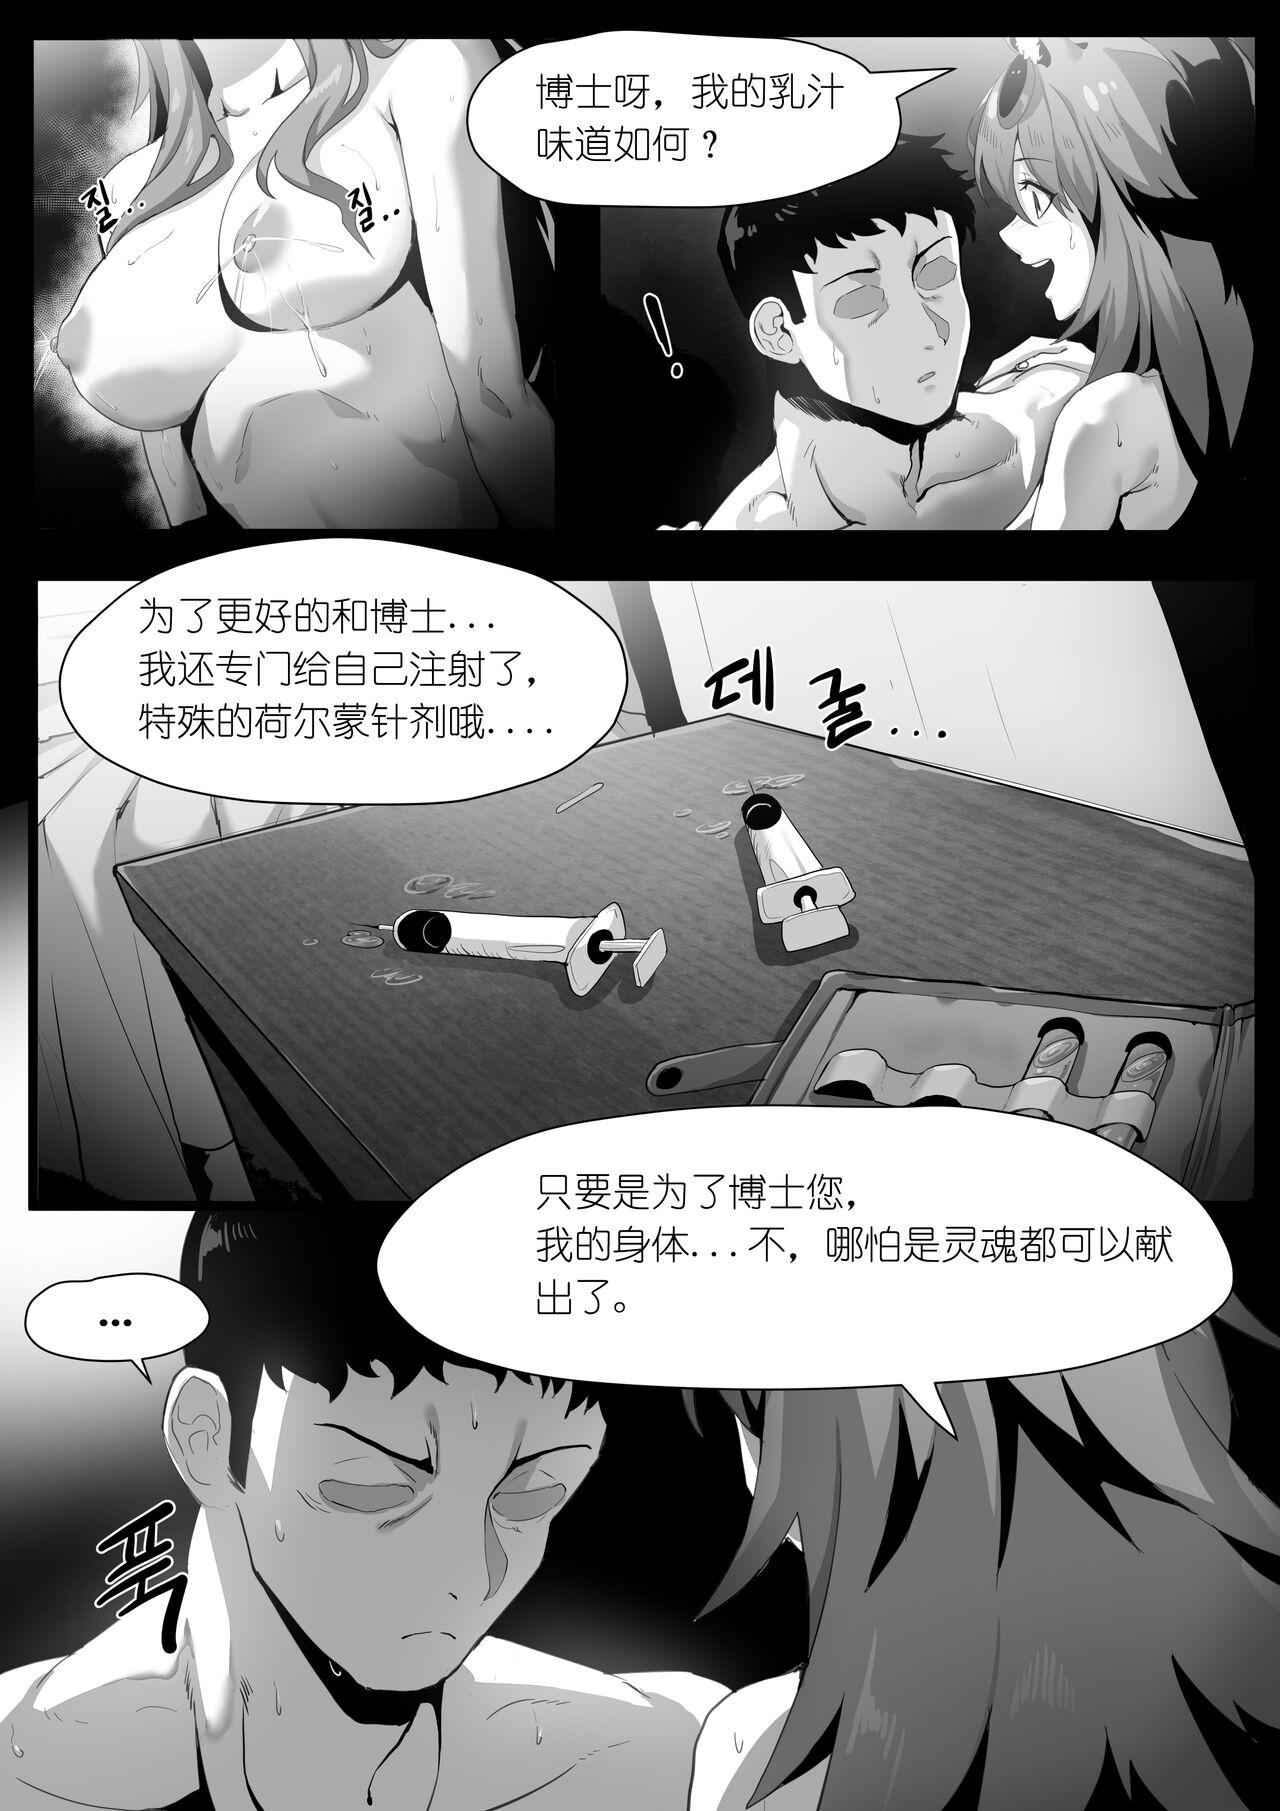 Kiss 欲望方舟记录3 - Arknights Riding Cock - Page 4